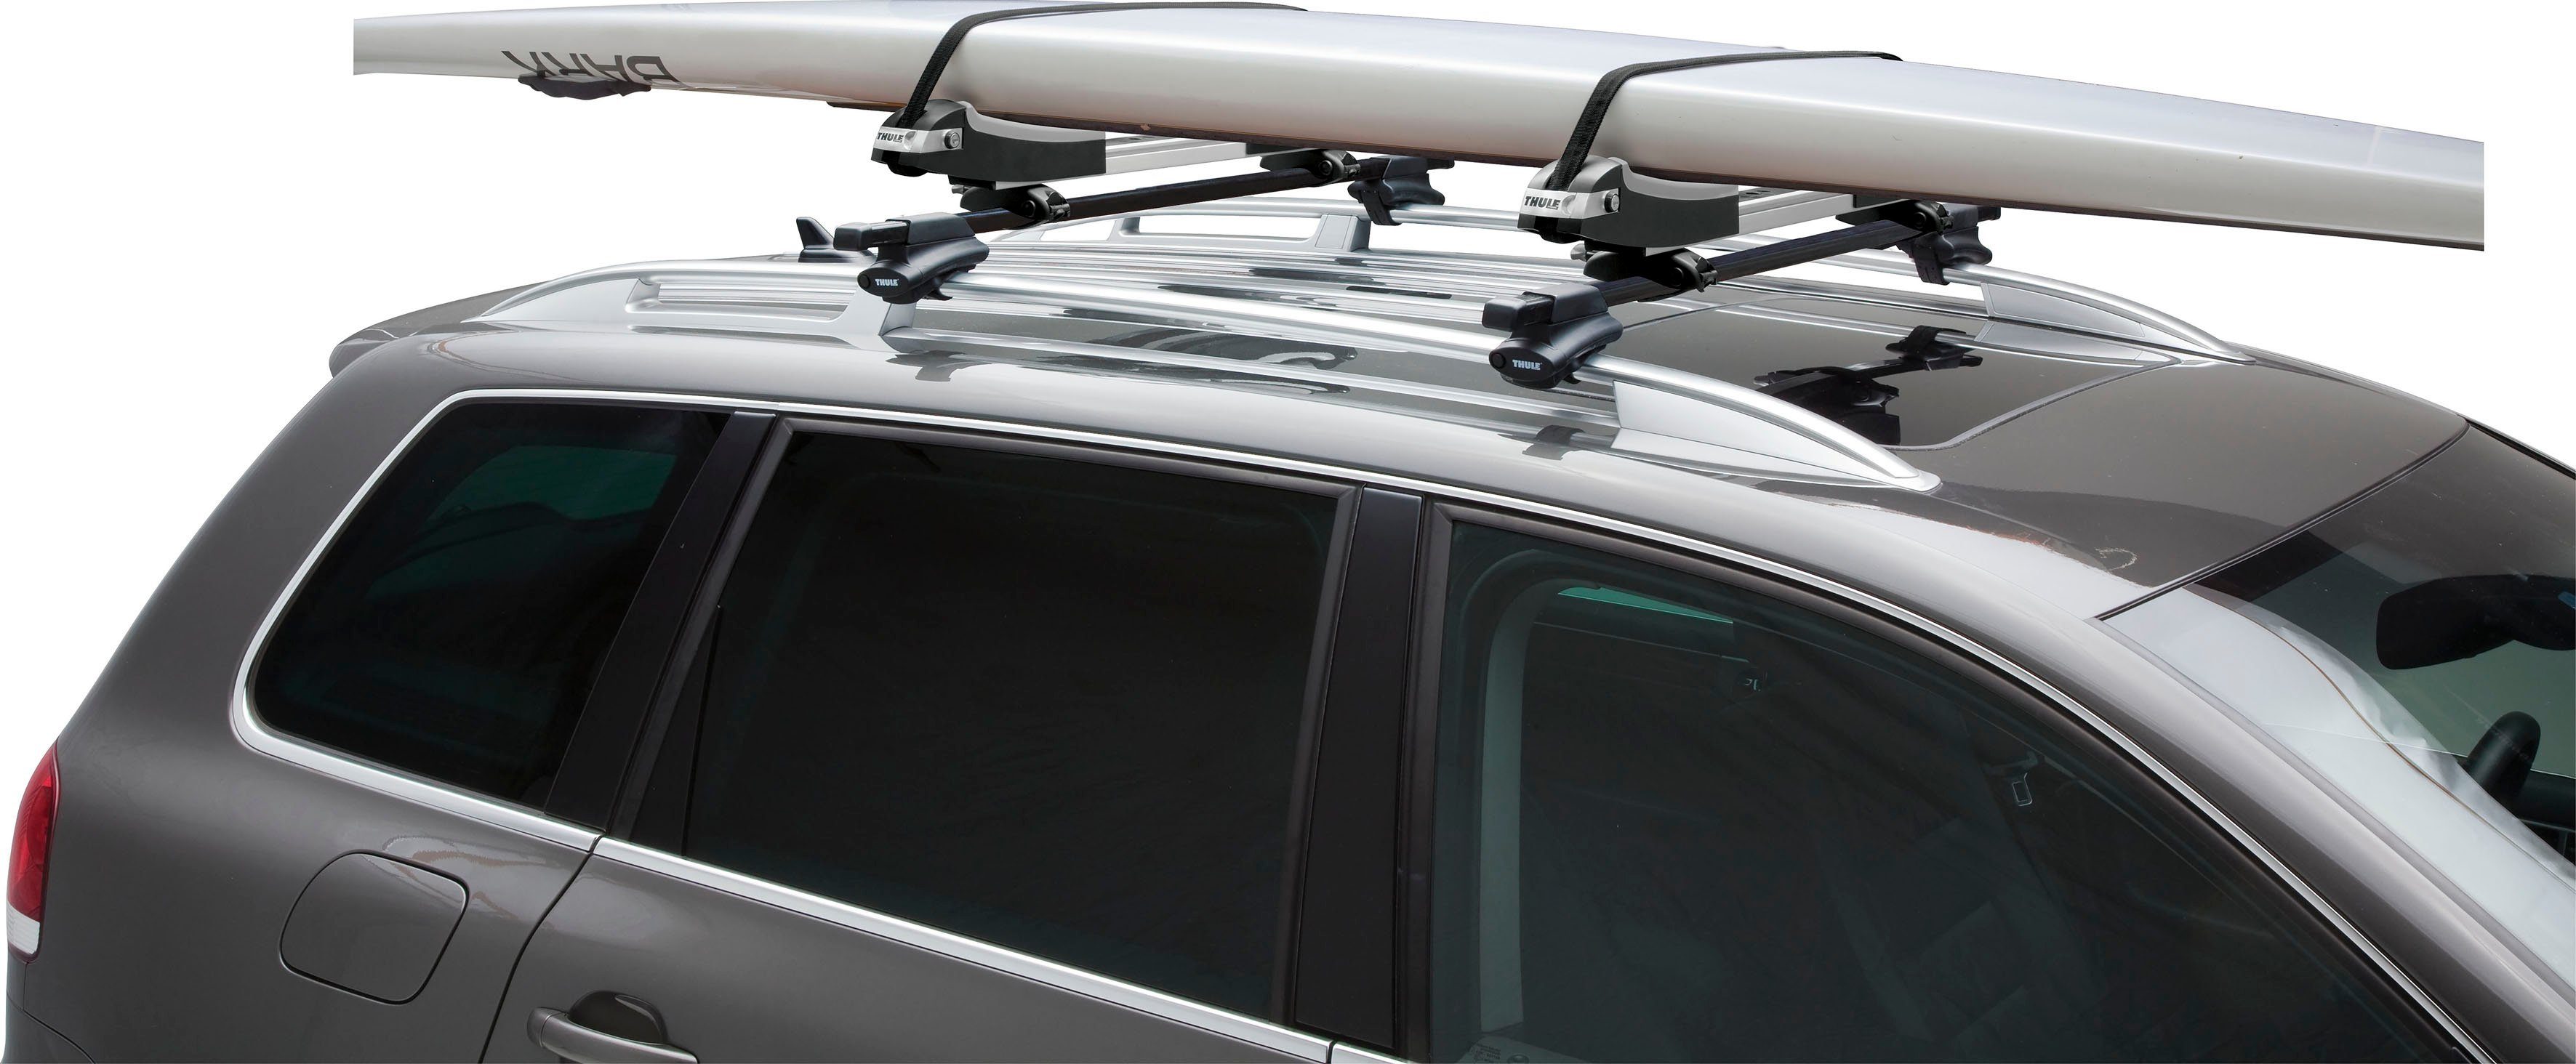 SUP Taxi für Dachträger XT, SUP-Boards Thule